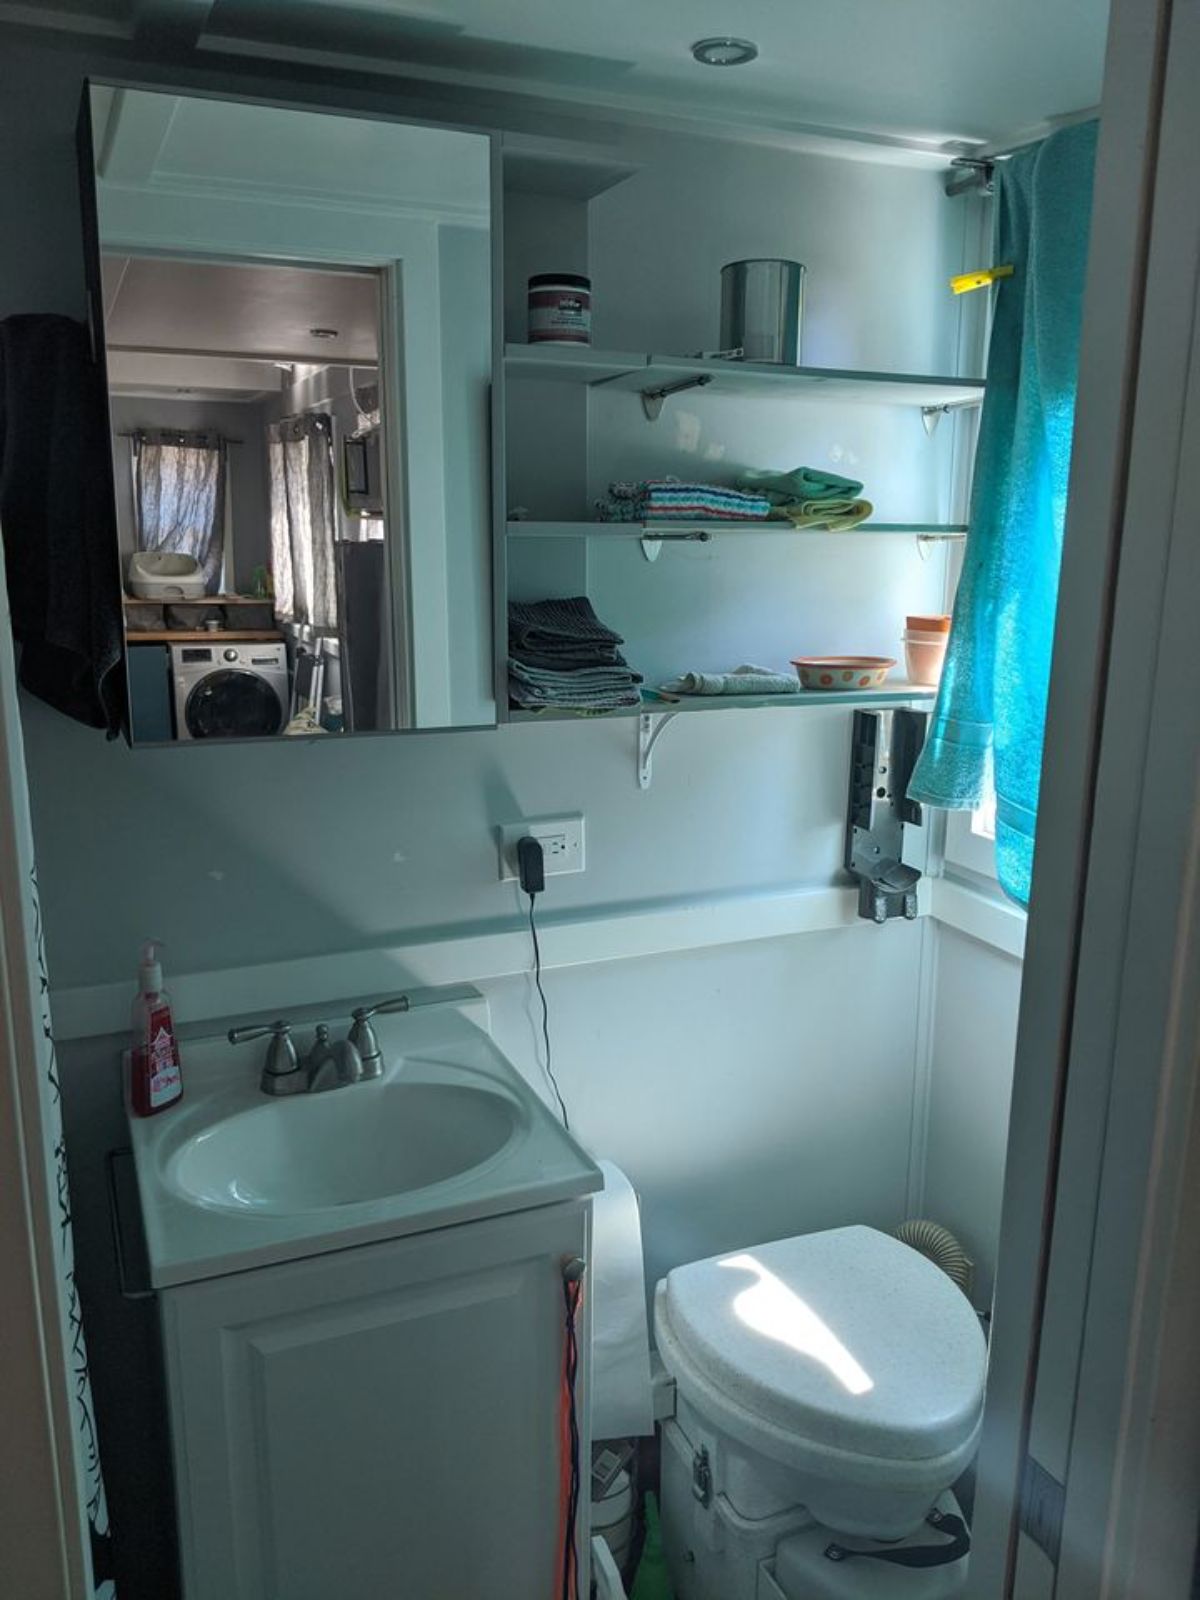 It has a compact bathroom with toilet, cabinet, sink and shower area